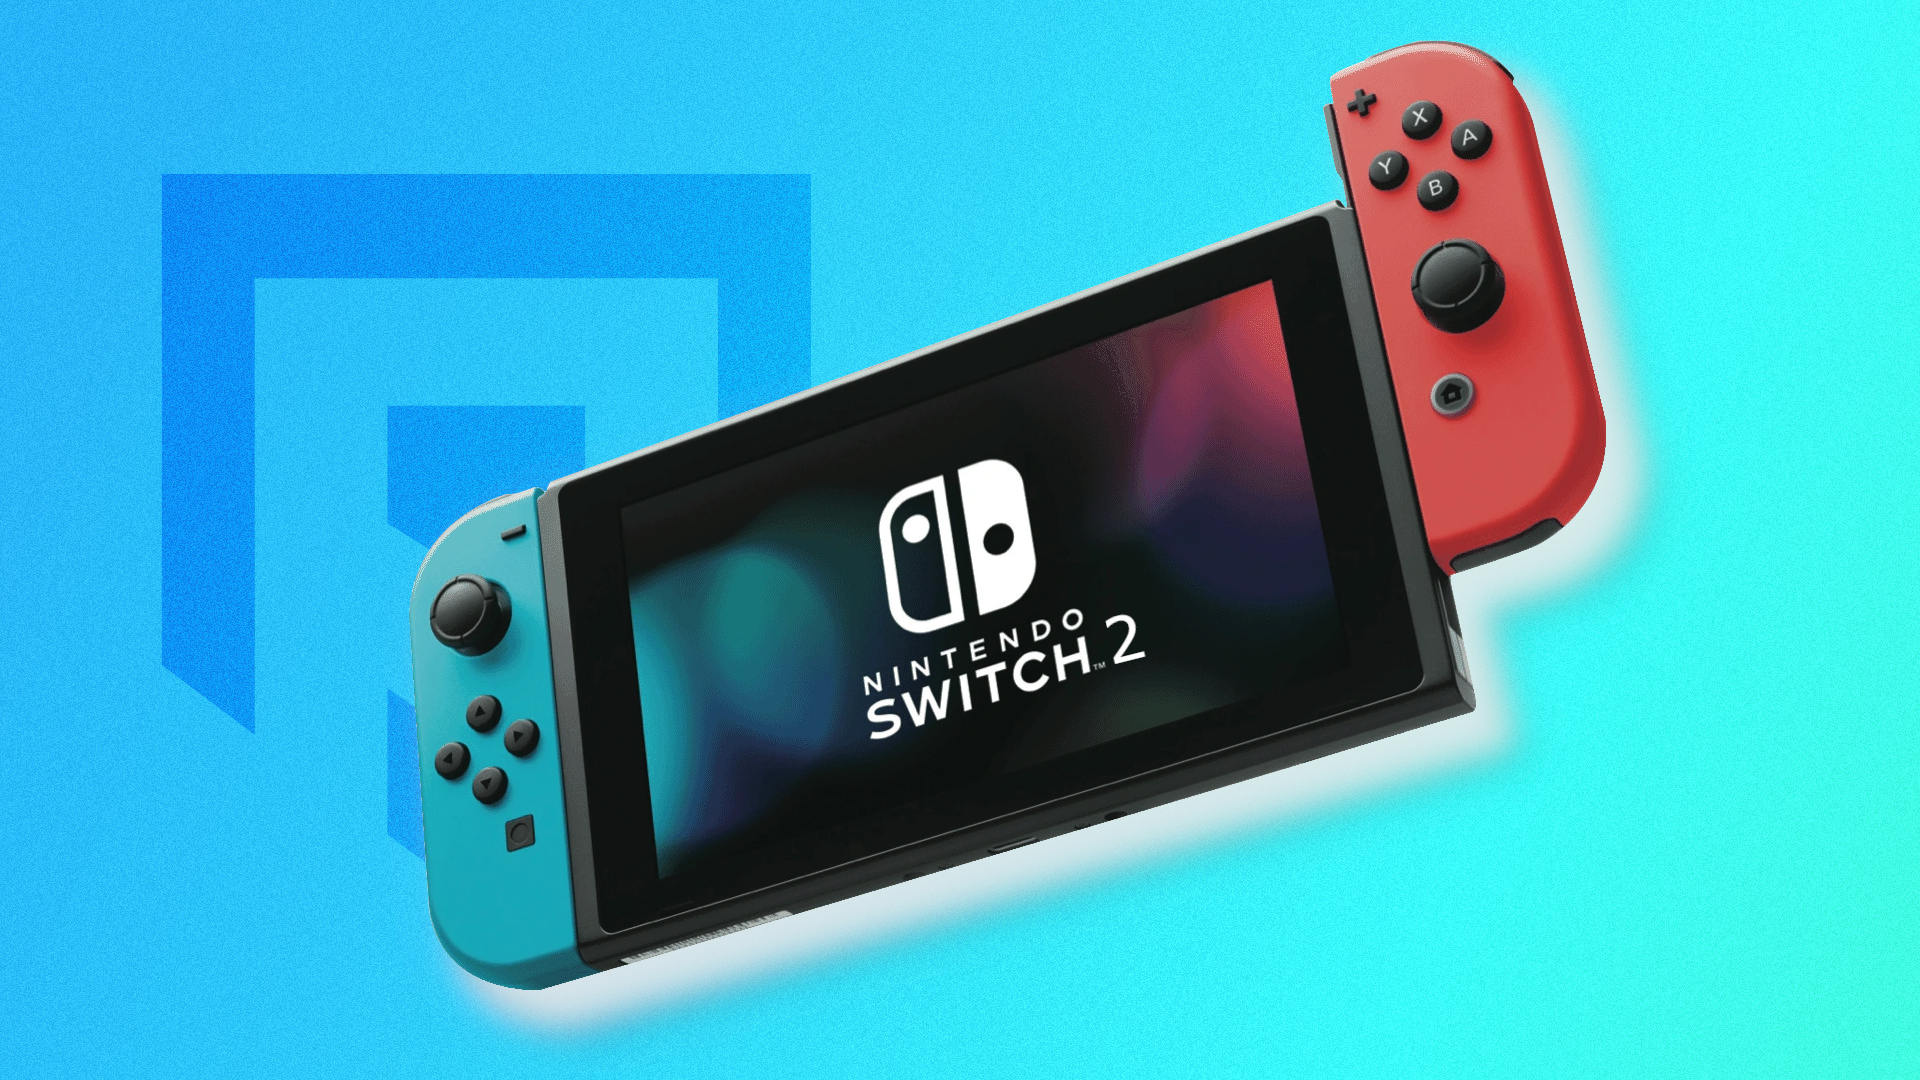 Nintendo Switch 2 release date estimate and leaks